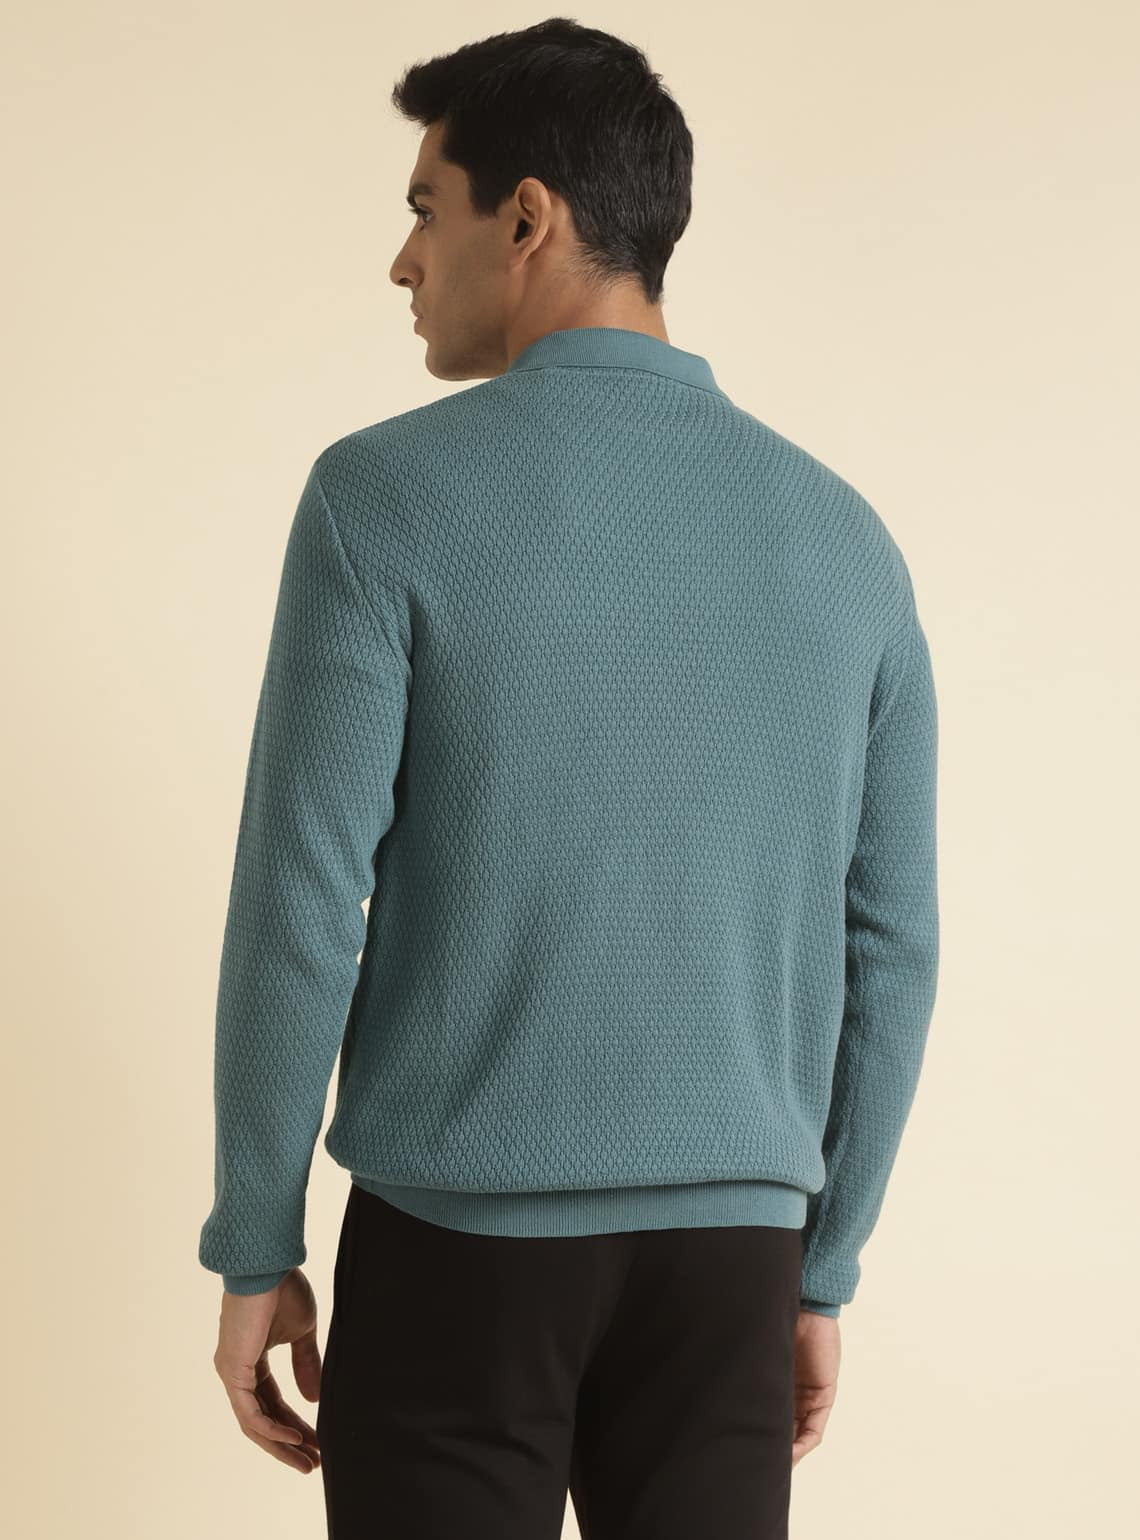 Teal Blue Sweater